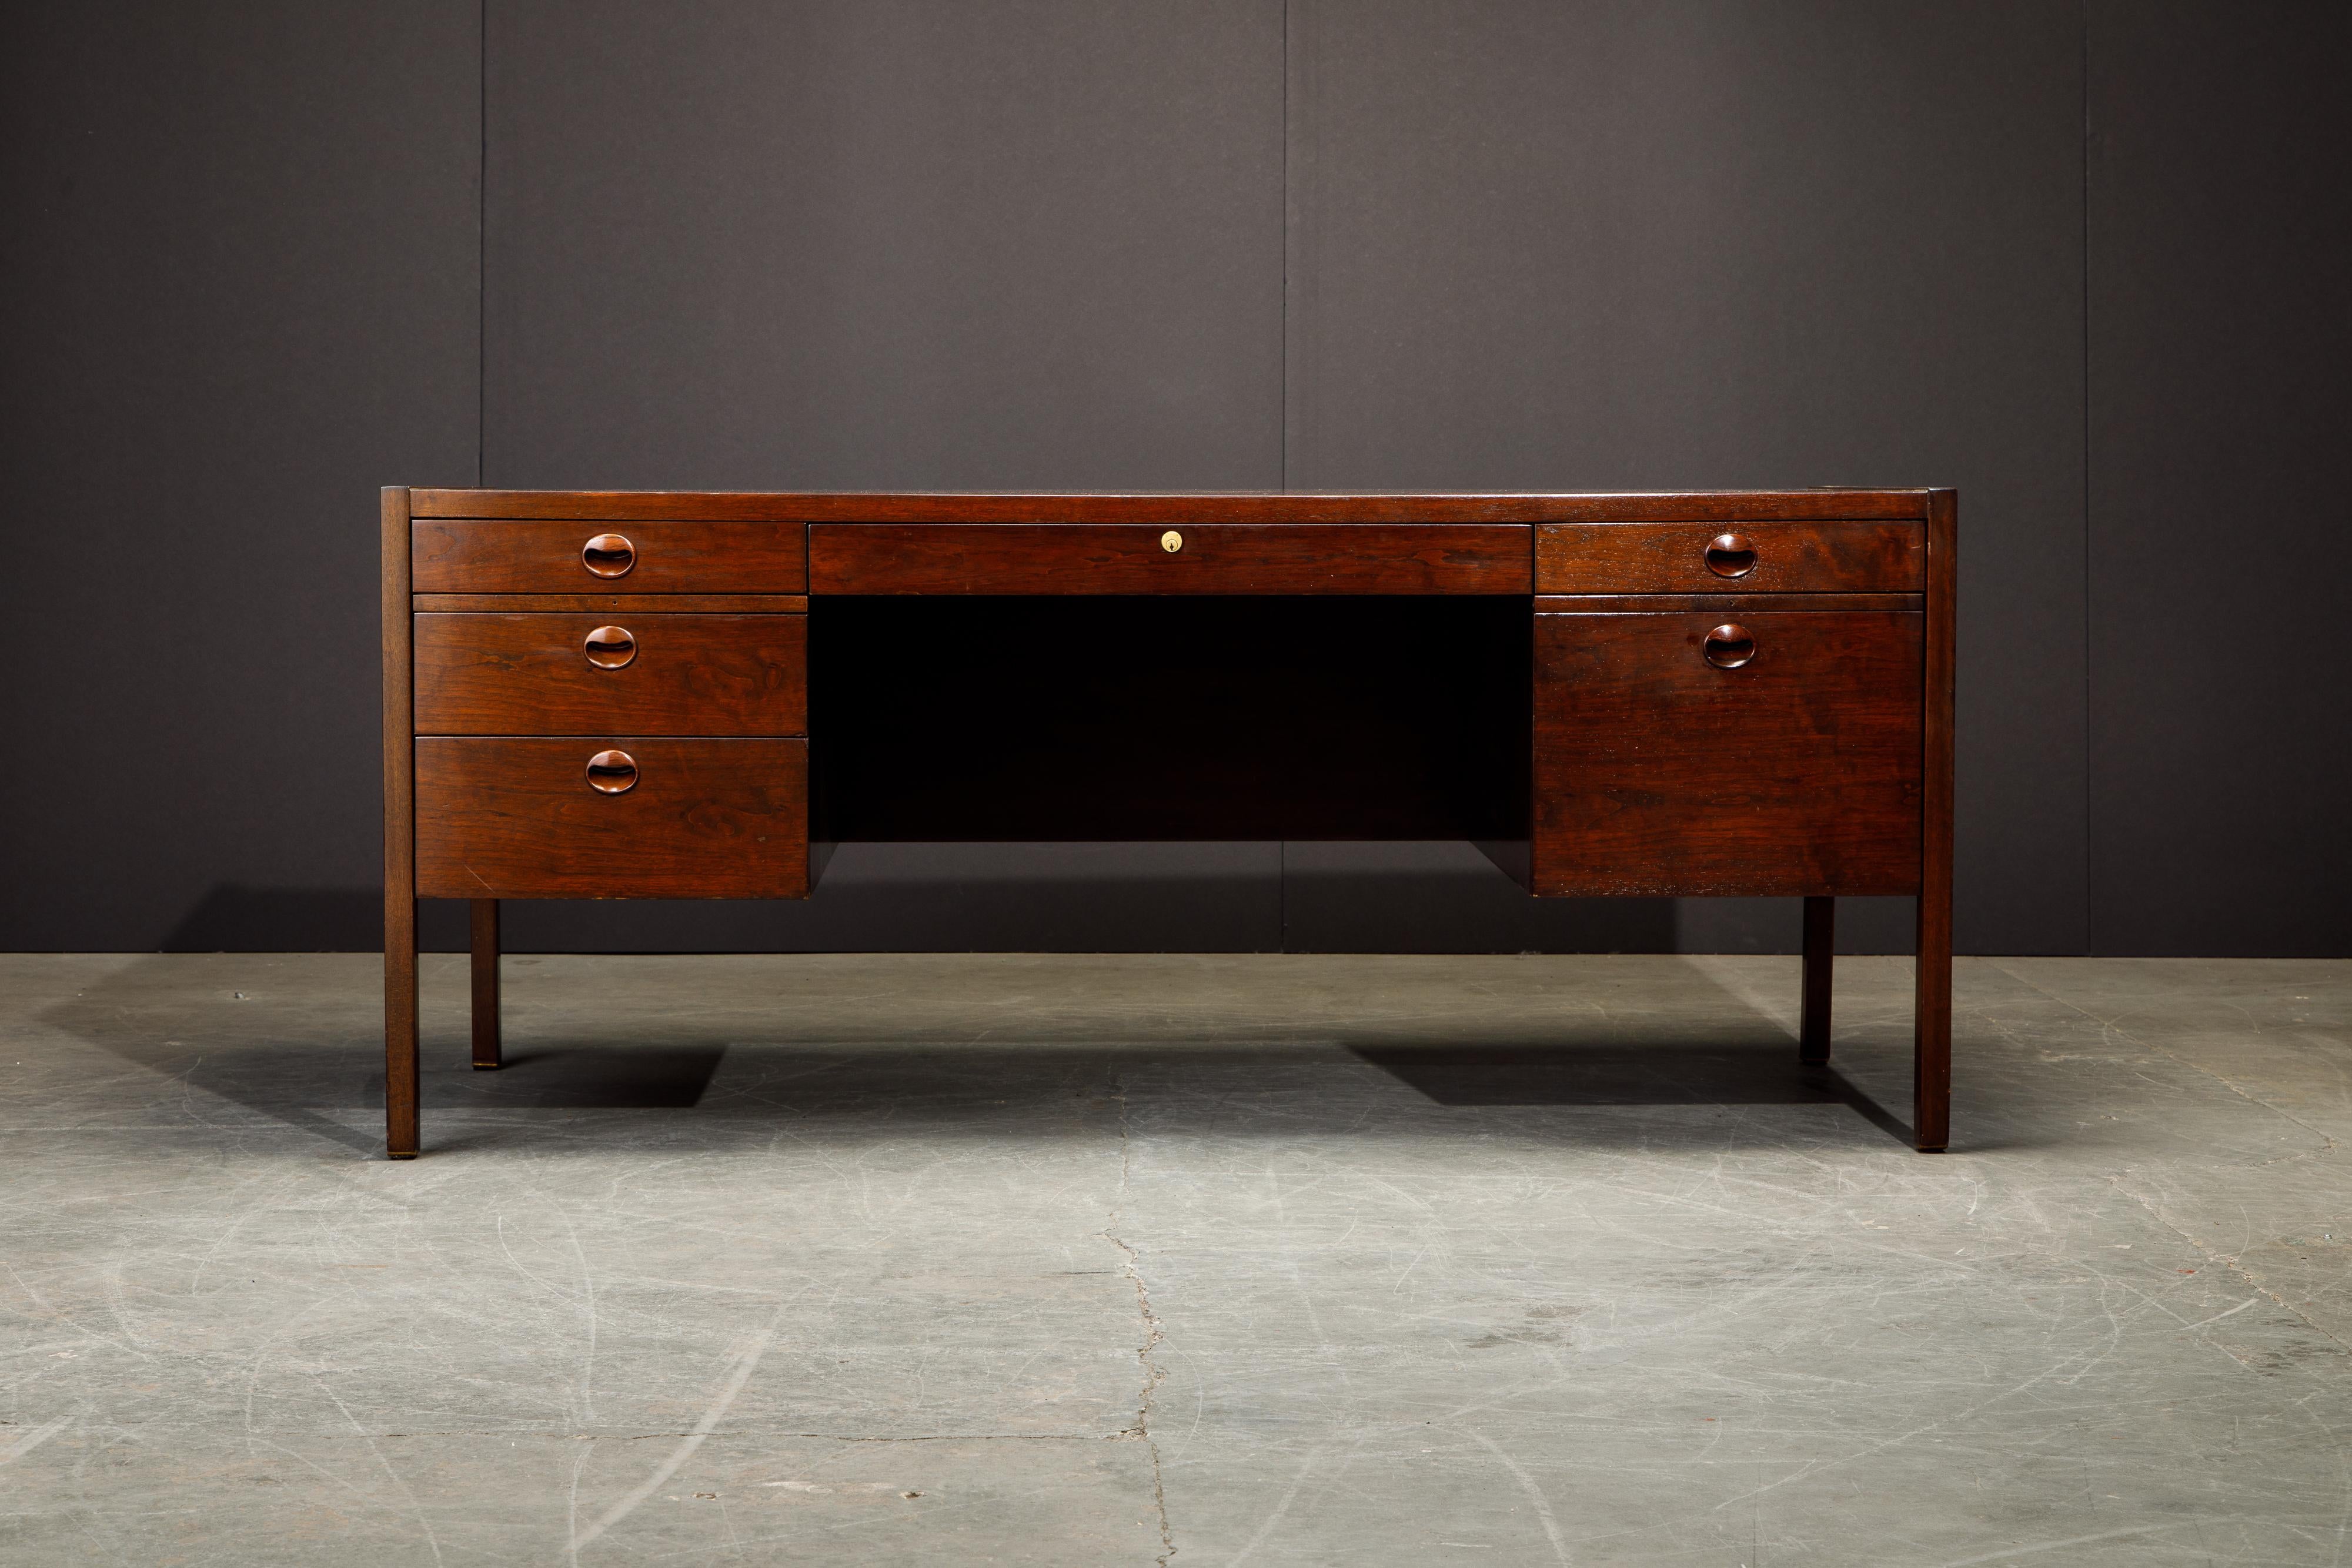 This grand executive desk by Edward Wormley for Dunbar features beautiful Rosewood and Mahogany with brass feet, designed and made in the 1960s. Such incredible use of luxury materials and quality craftsmanship as you would expect from Dunbar in the